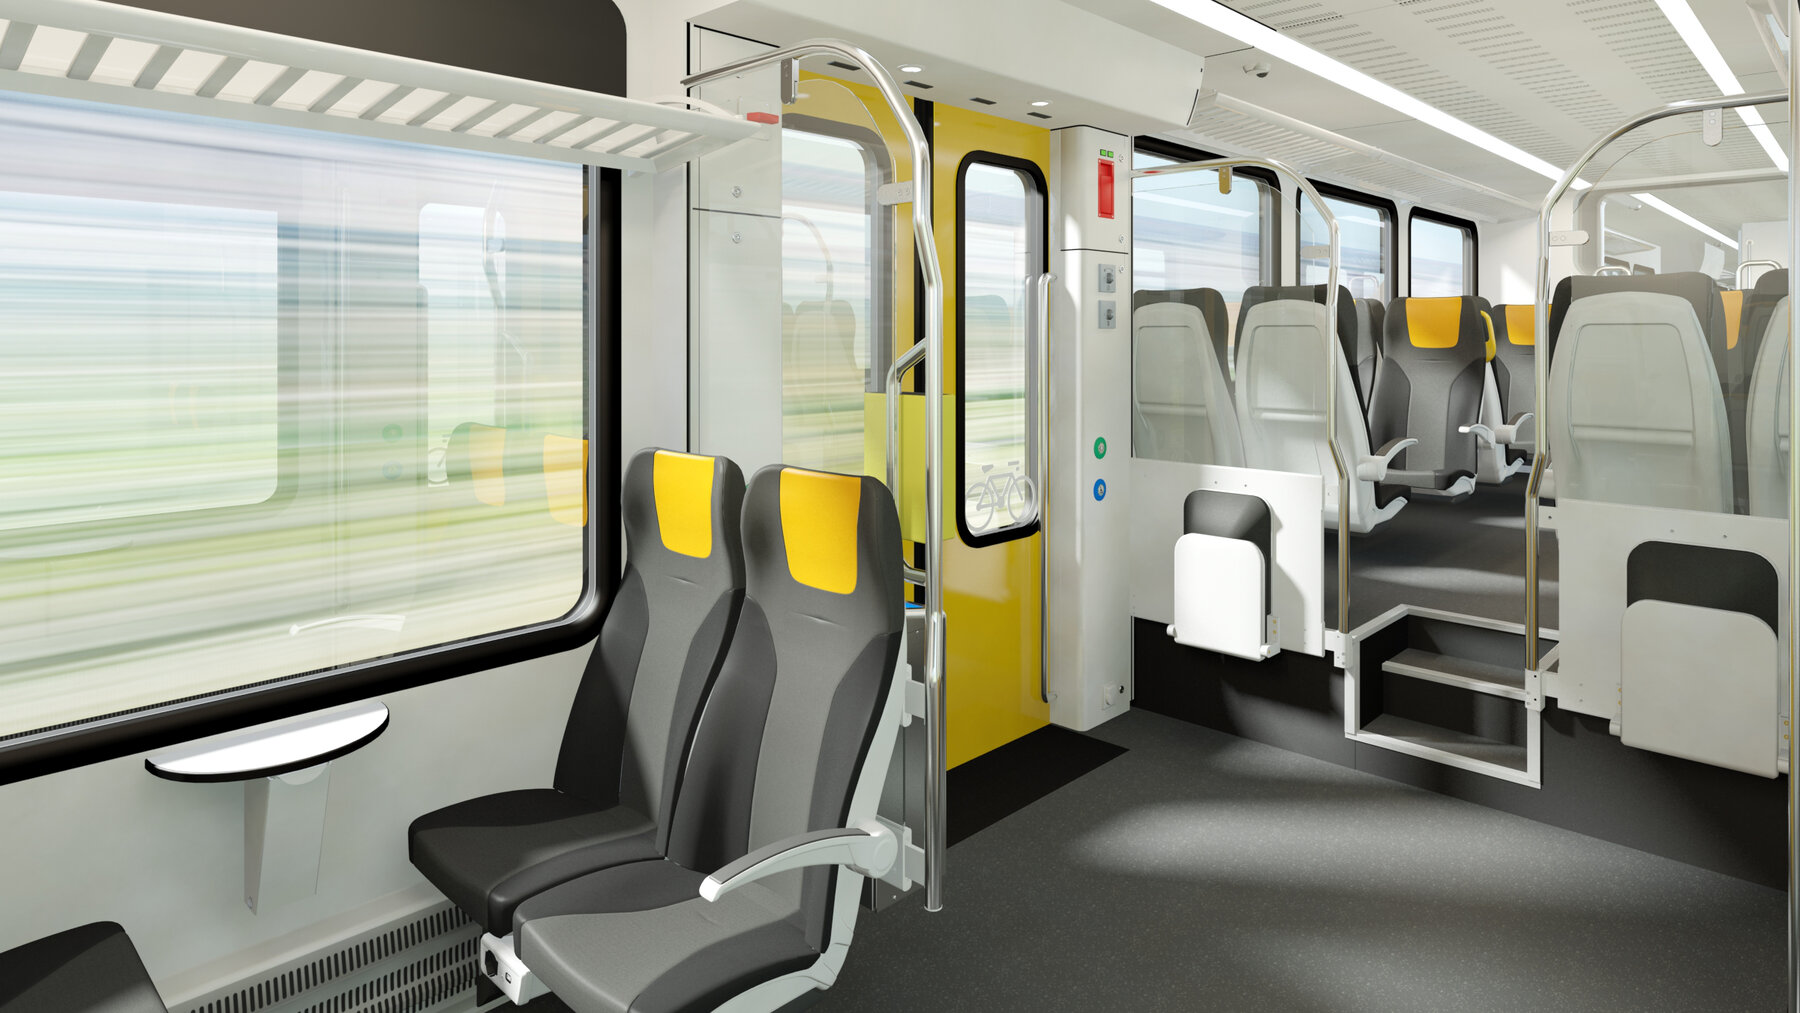 An interior rendering of the new hydrogen trains